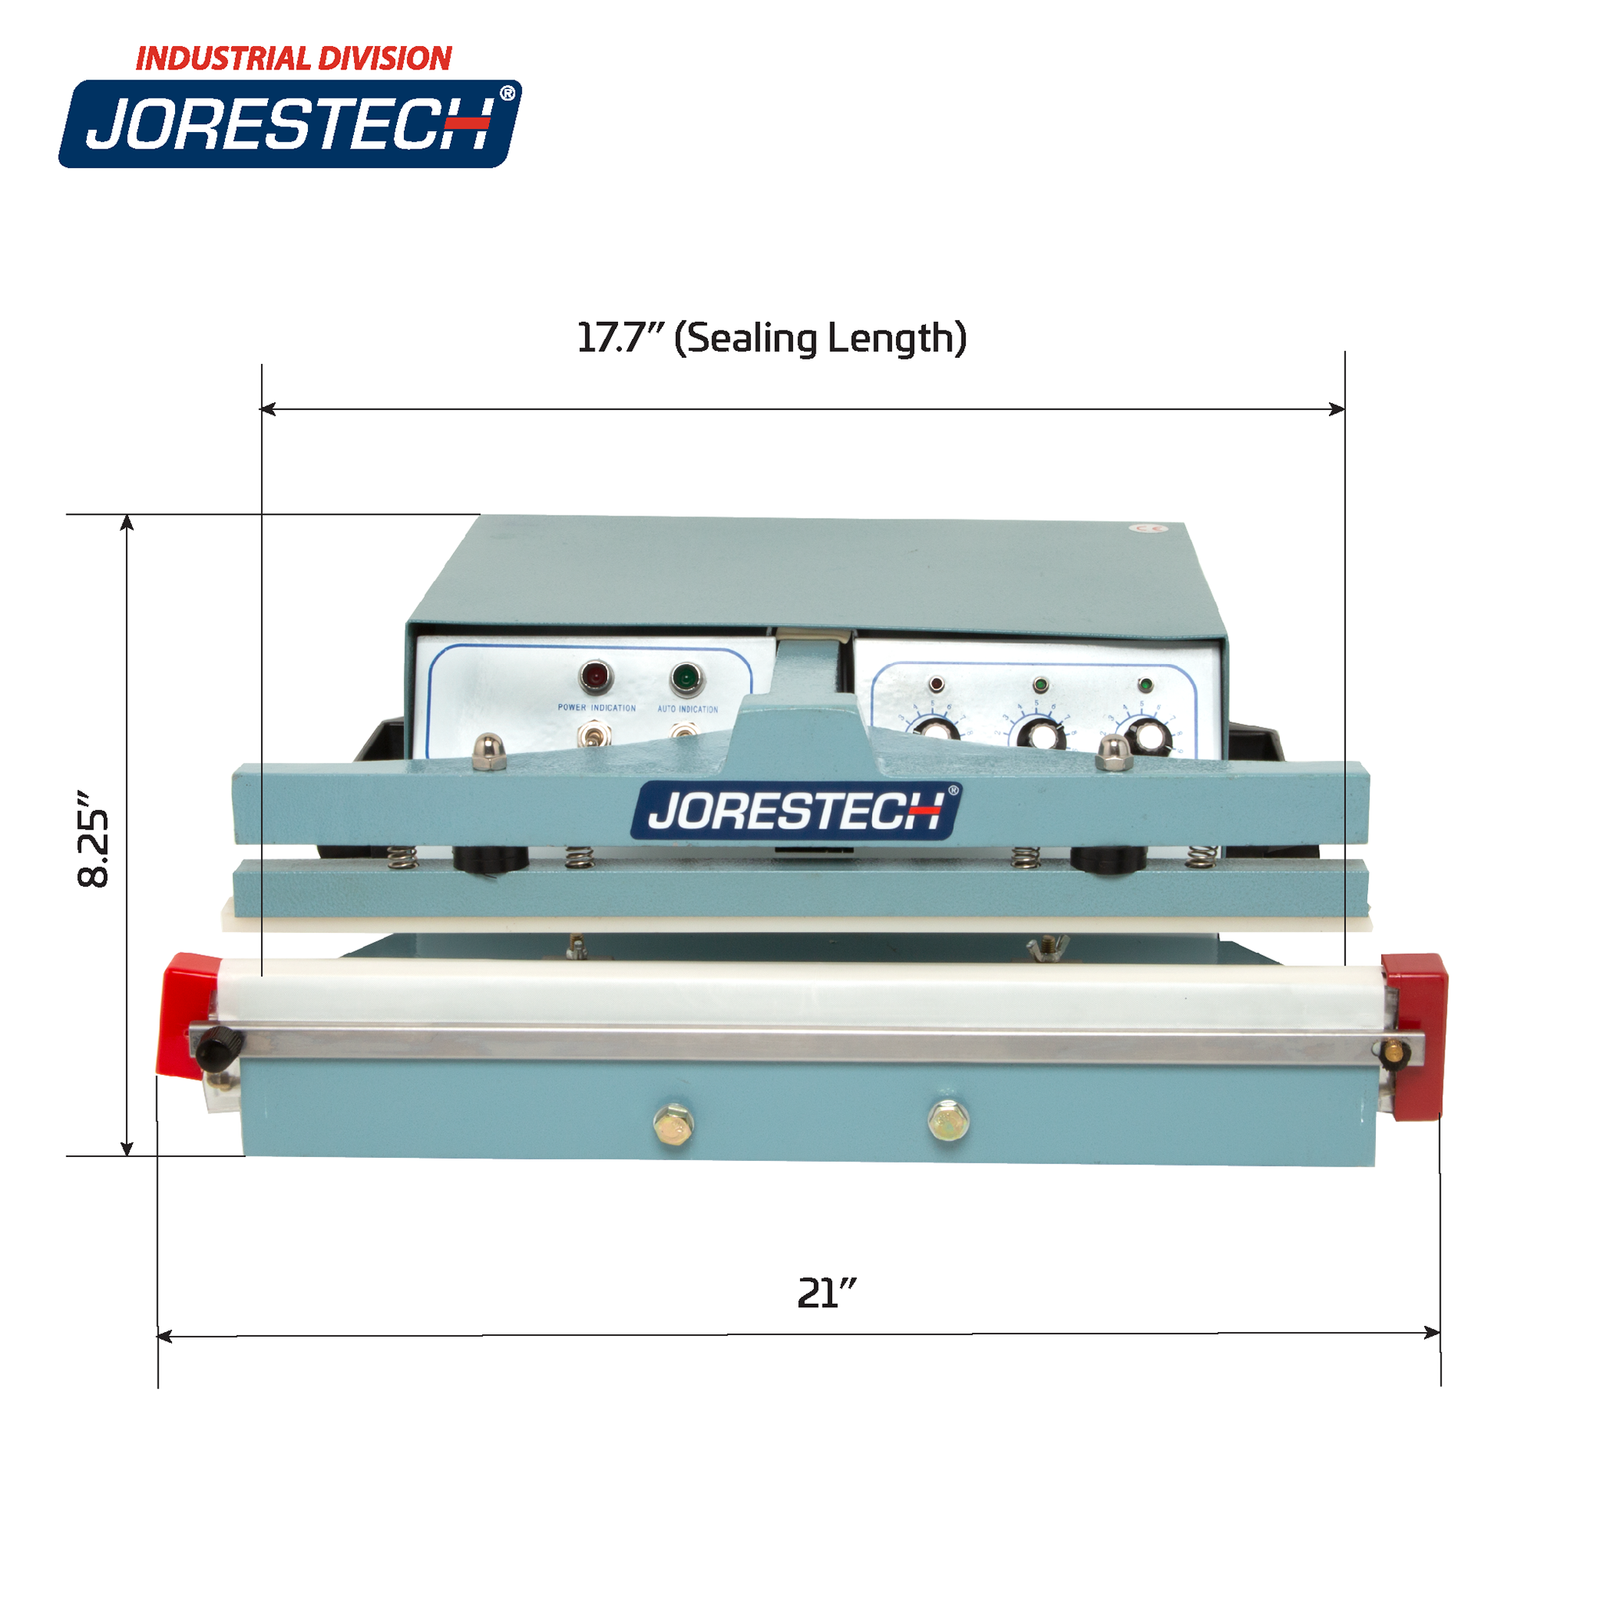 Infographic shows JORES TECHNOLOGIES® table top foot impulse sealer with machine measurements. Machine measurements are 21